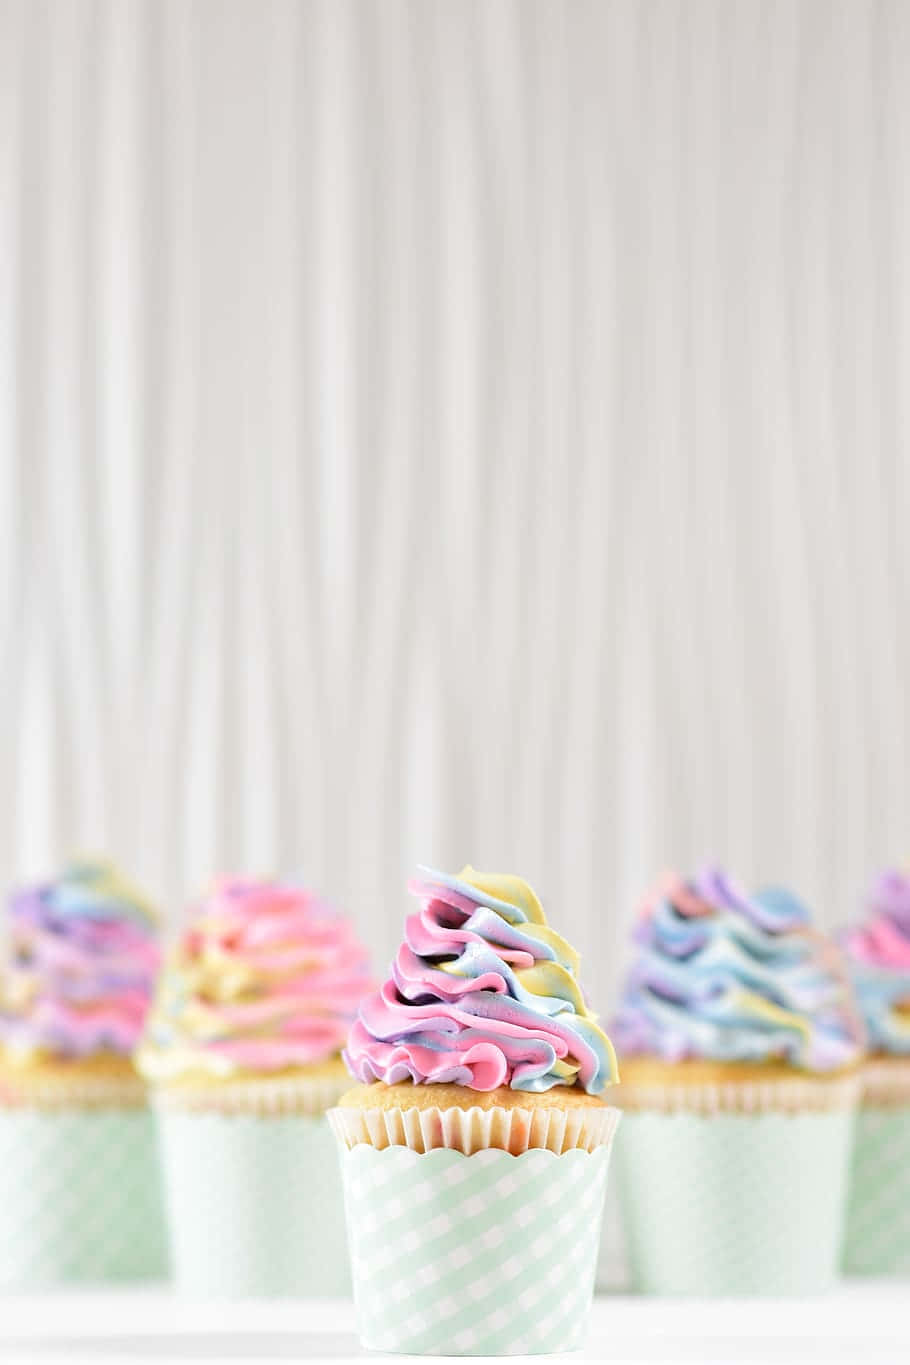 Download A Group Of Cupcakes With Colorful Frosting Wallpaper ...